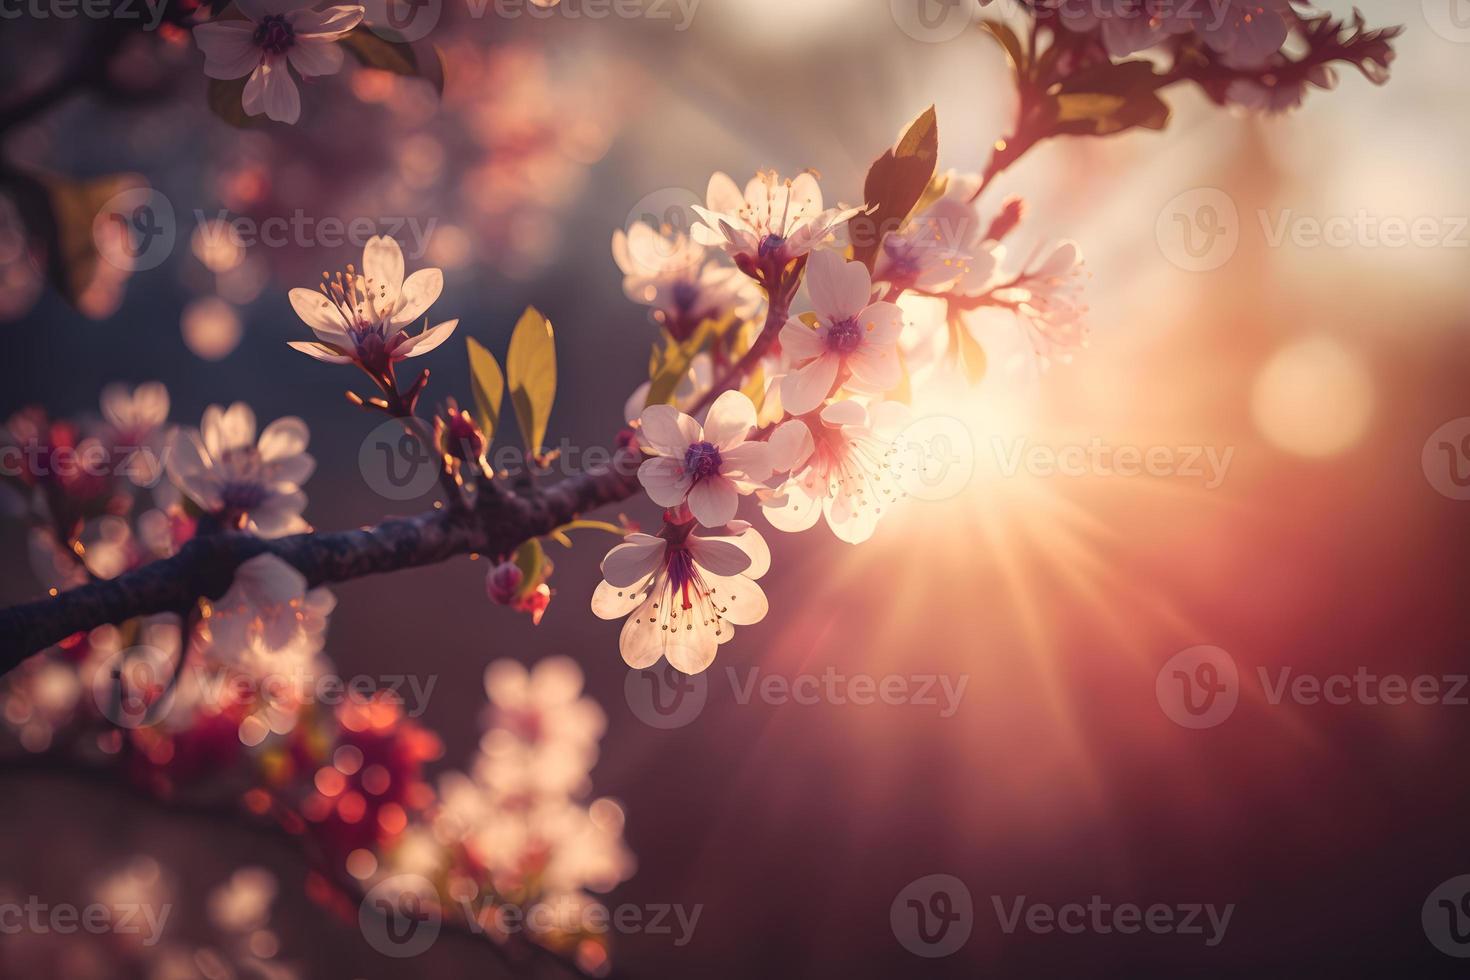 Spring blossom background. Nature scene with blooming tree and sun flare. Spring flowers. Beautiful orchard Photography photo